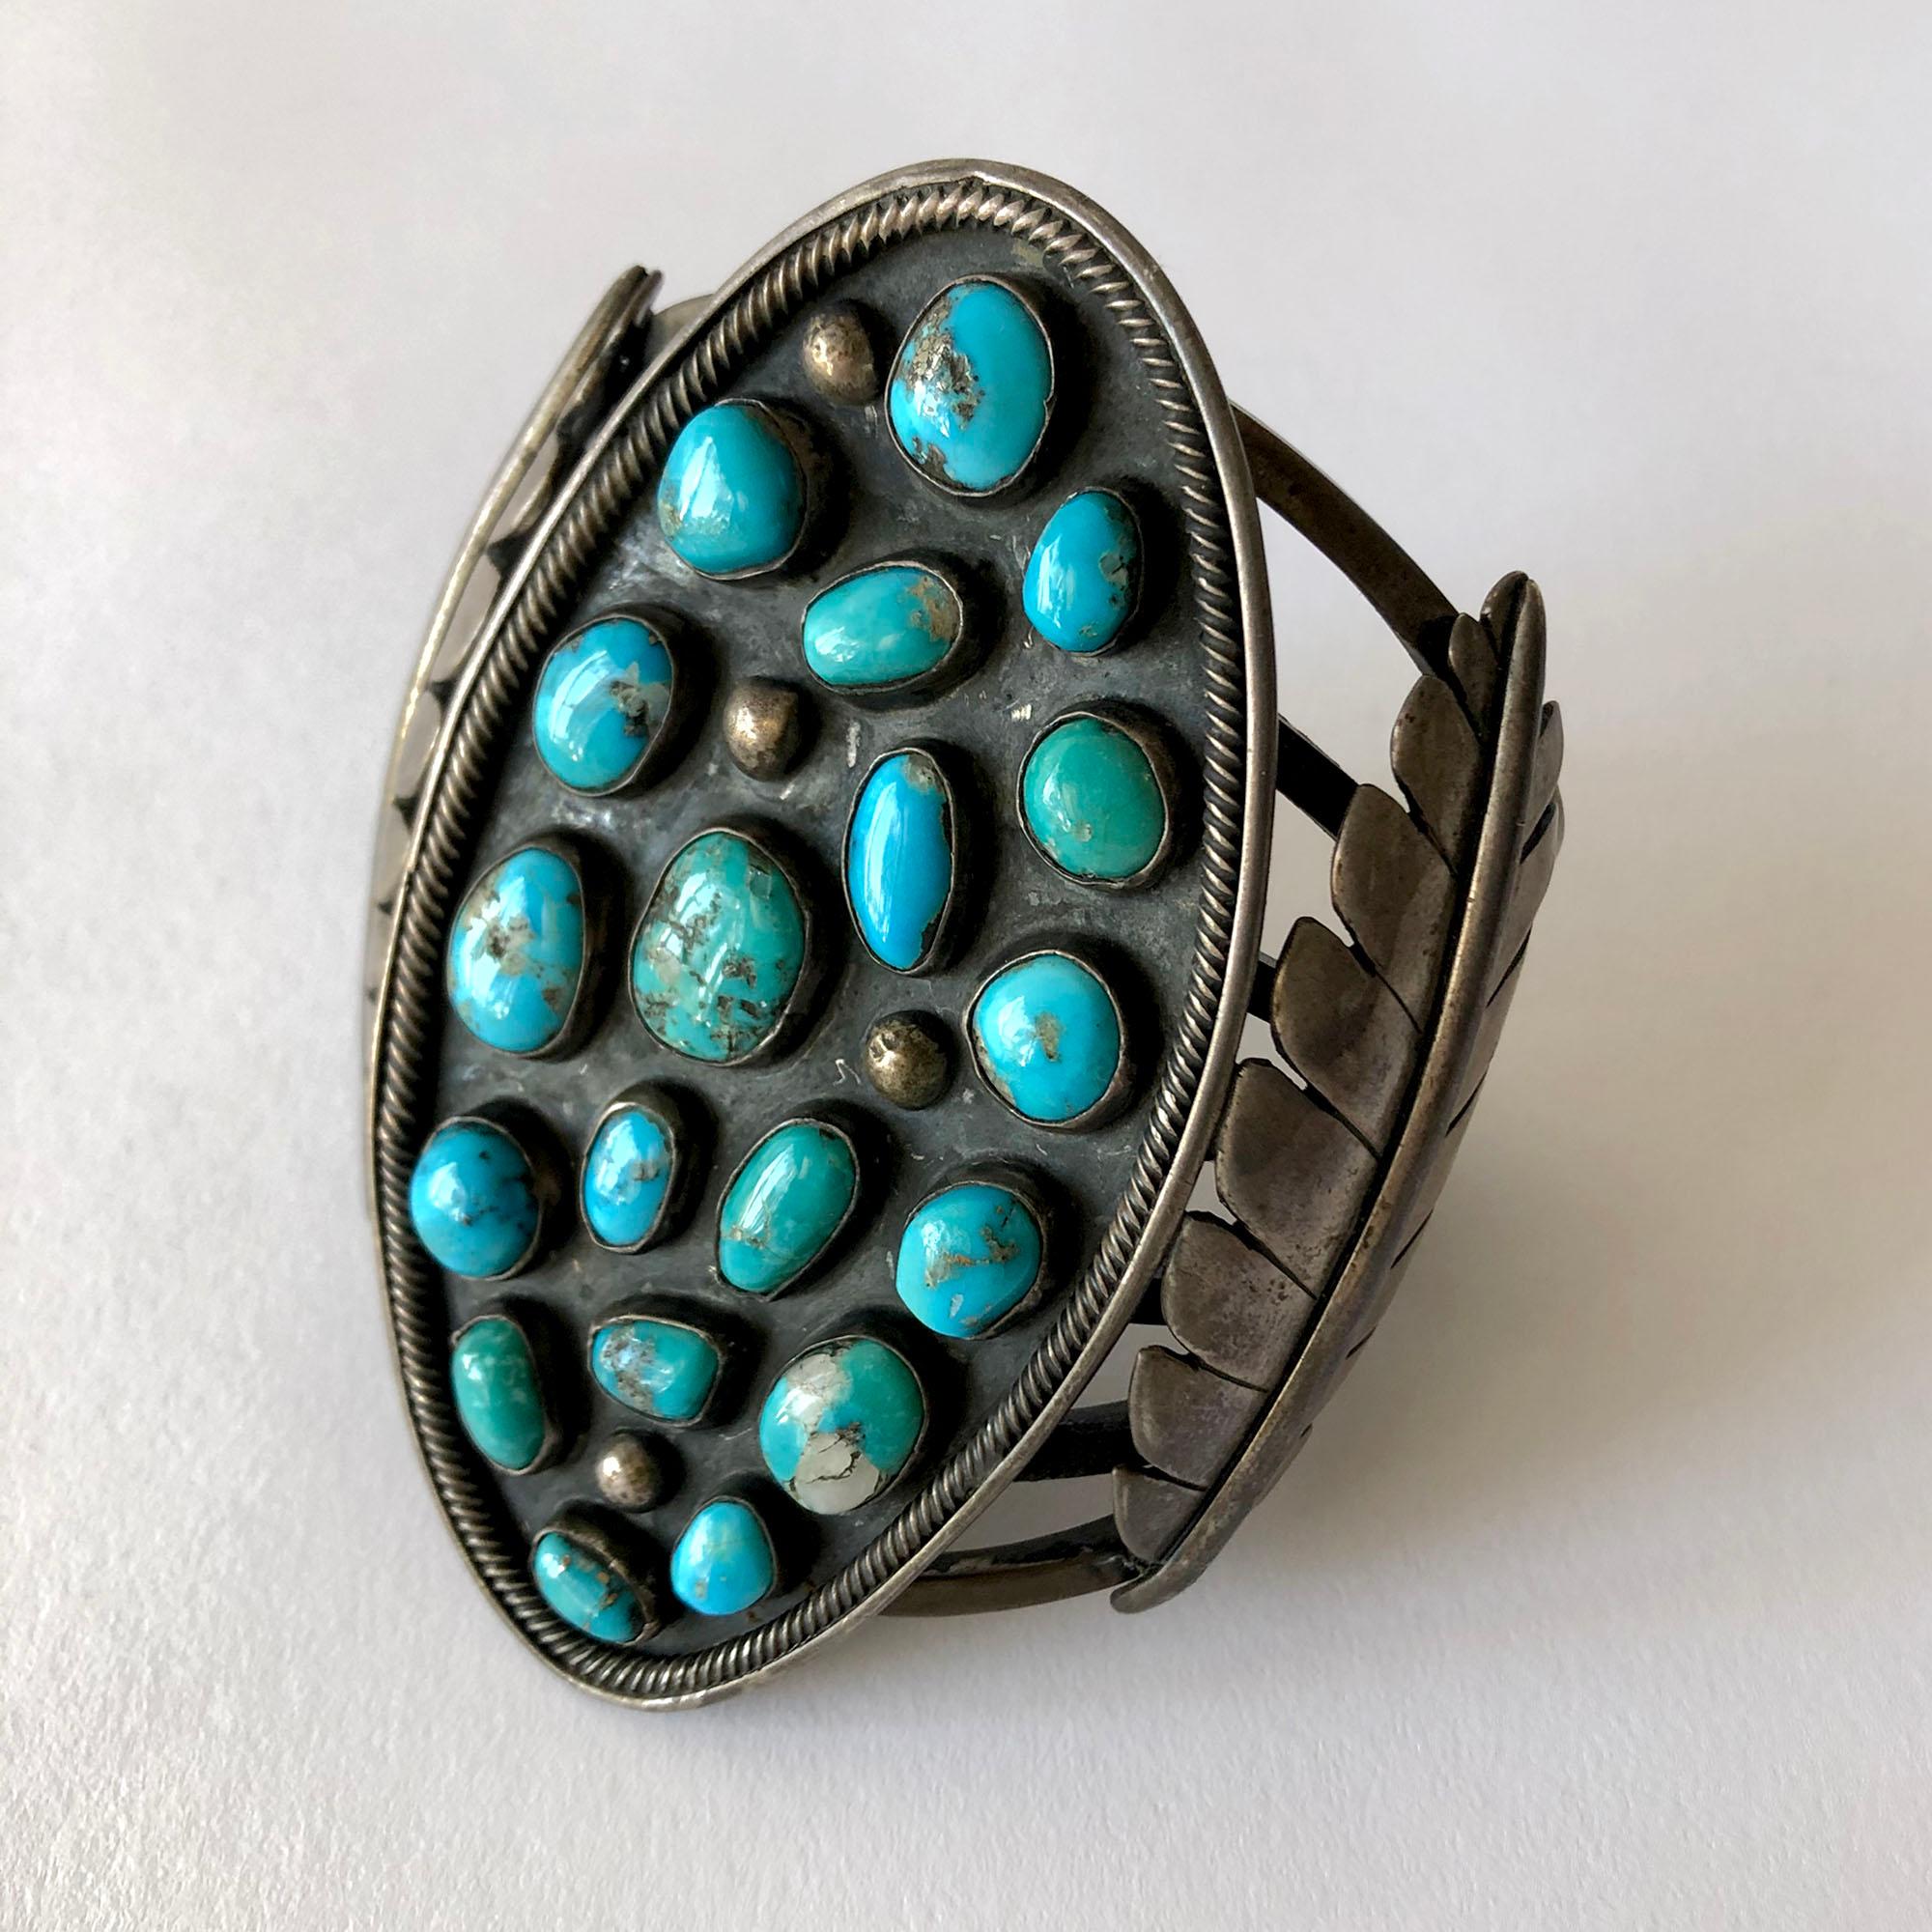 Large scale sterling silver and turquoise Navajo cuff bracelet with leaf design, circa 1960's.  Bracelet has a 7 3/4